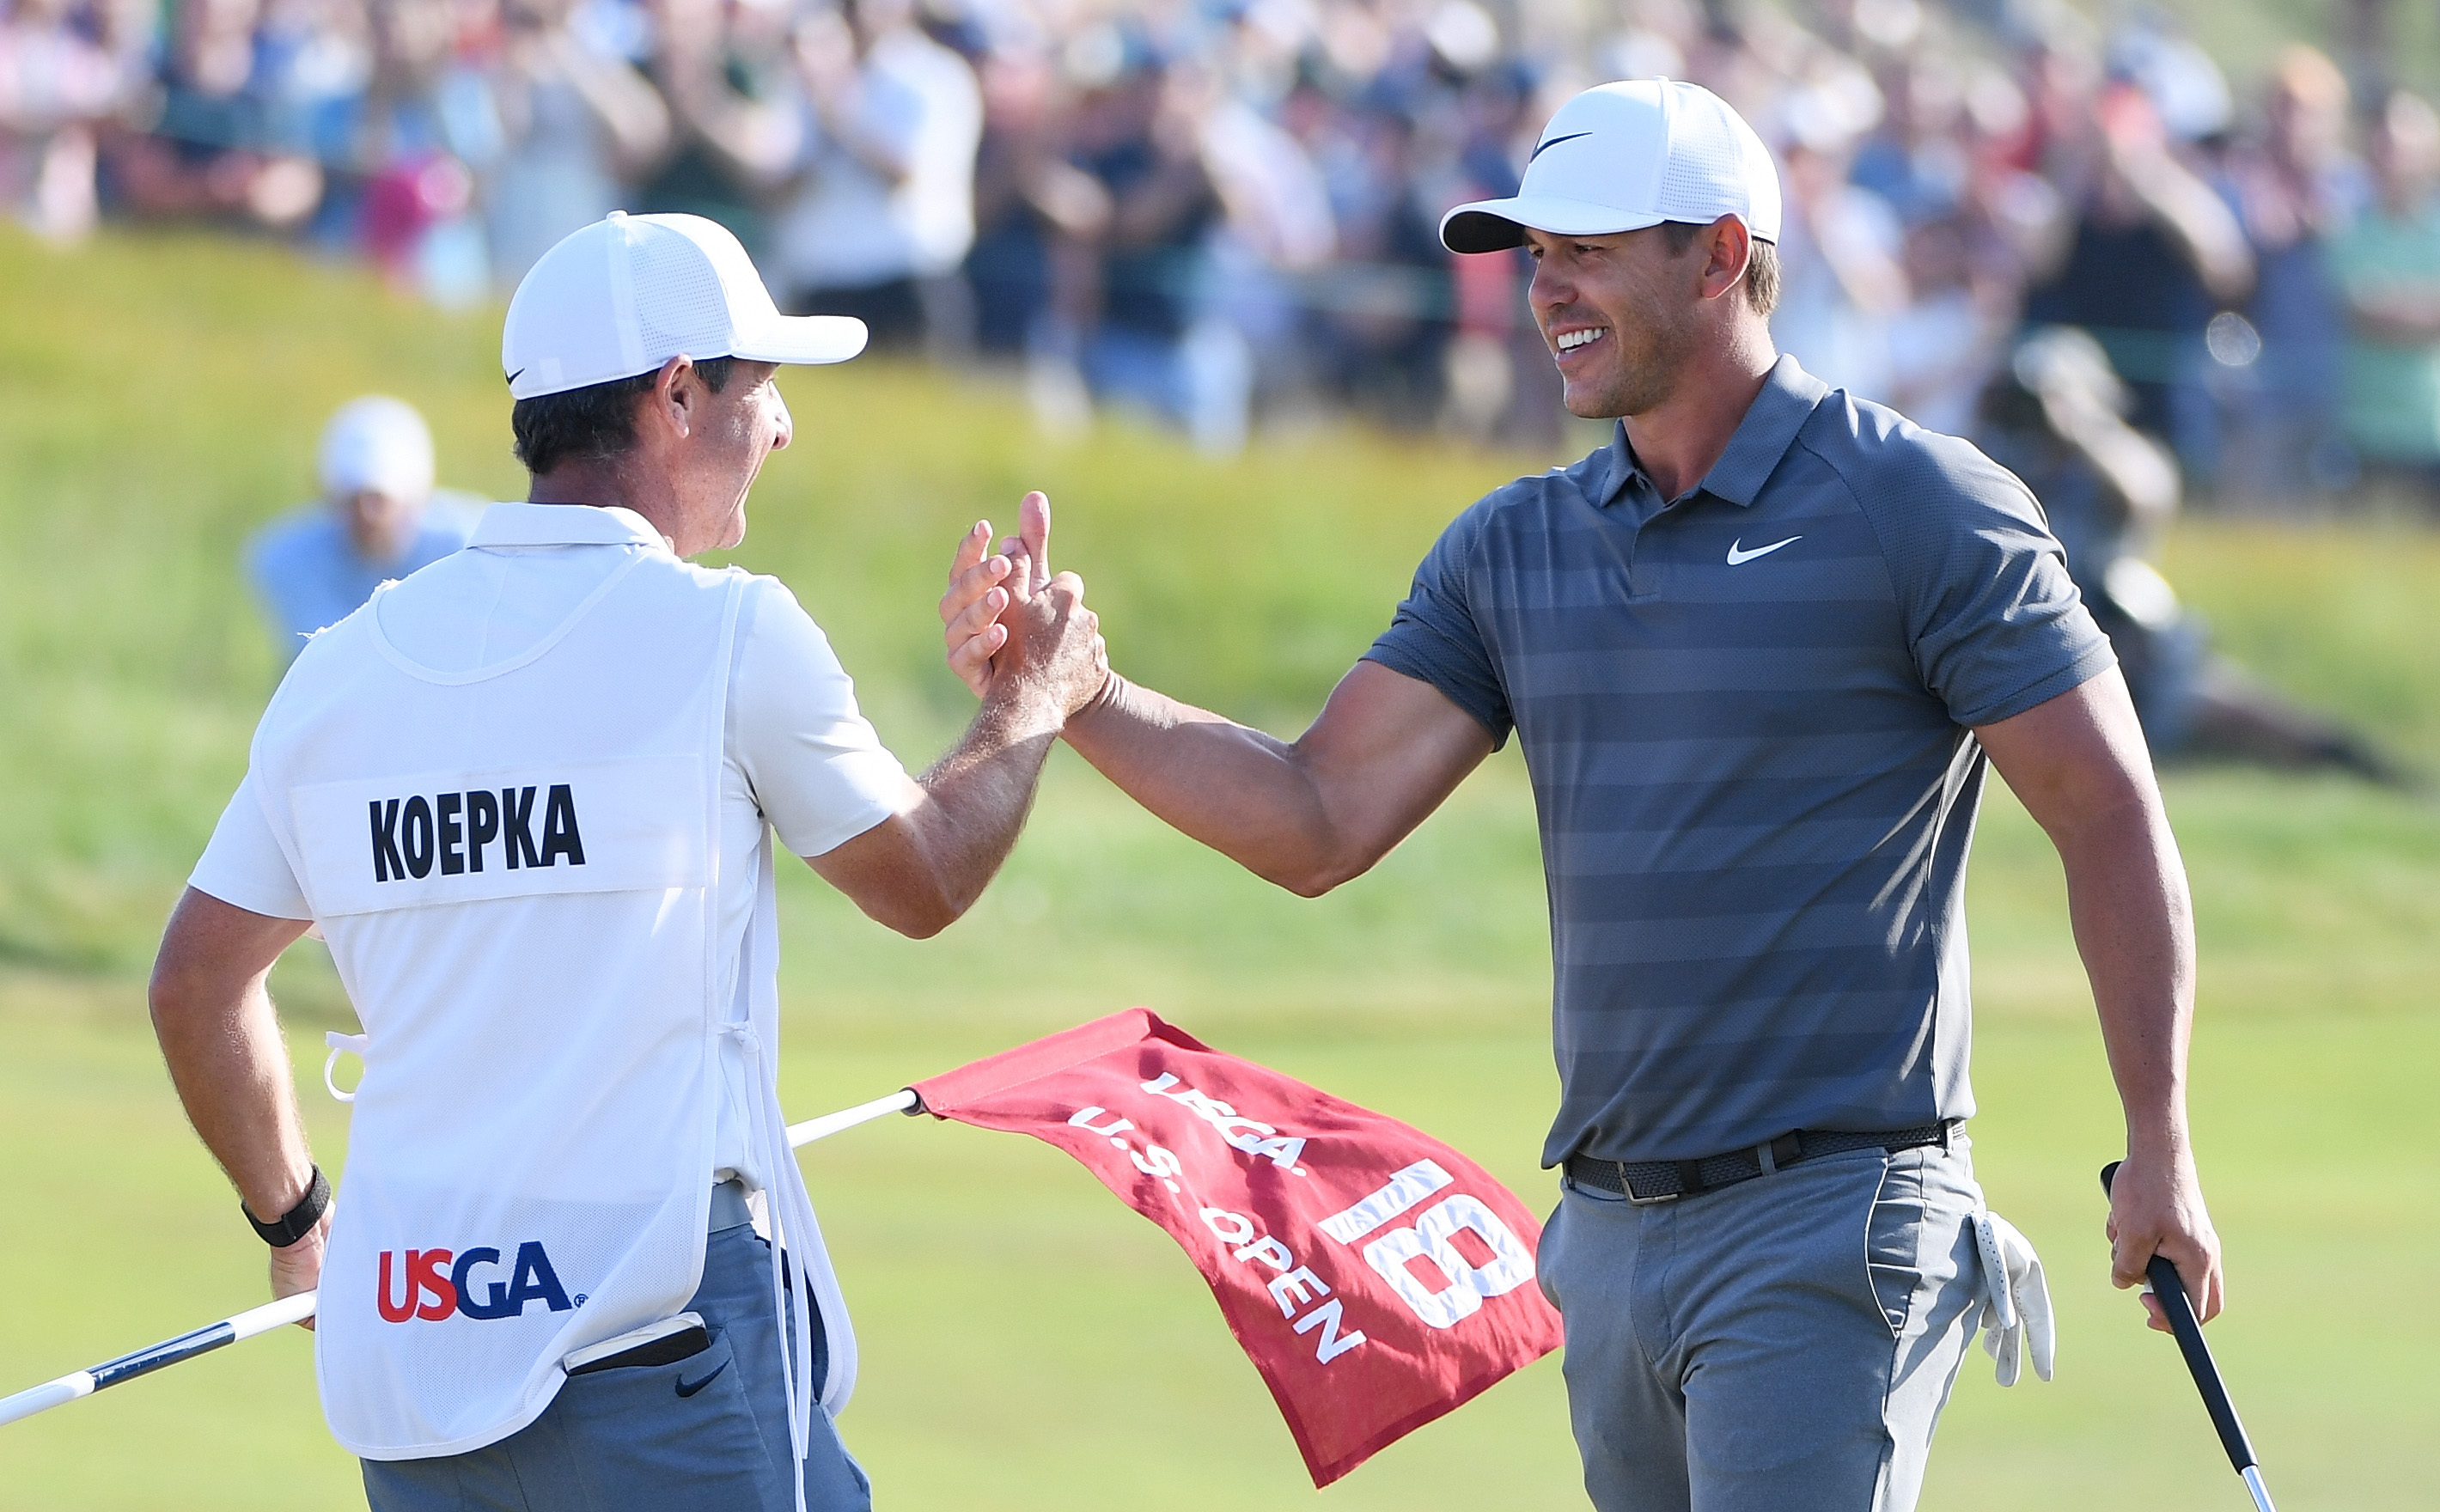 Brooks Koepka: the clubs he used to win the US Open